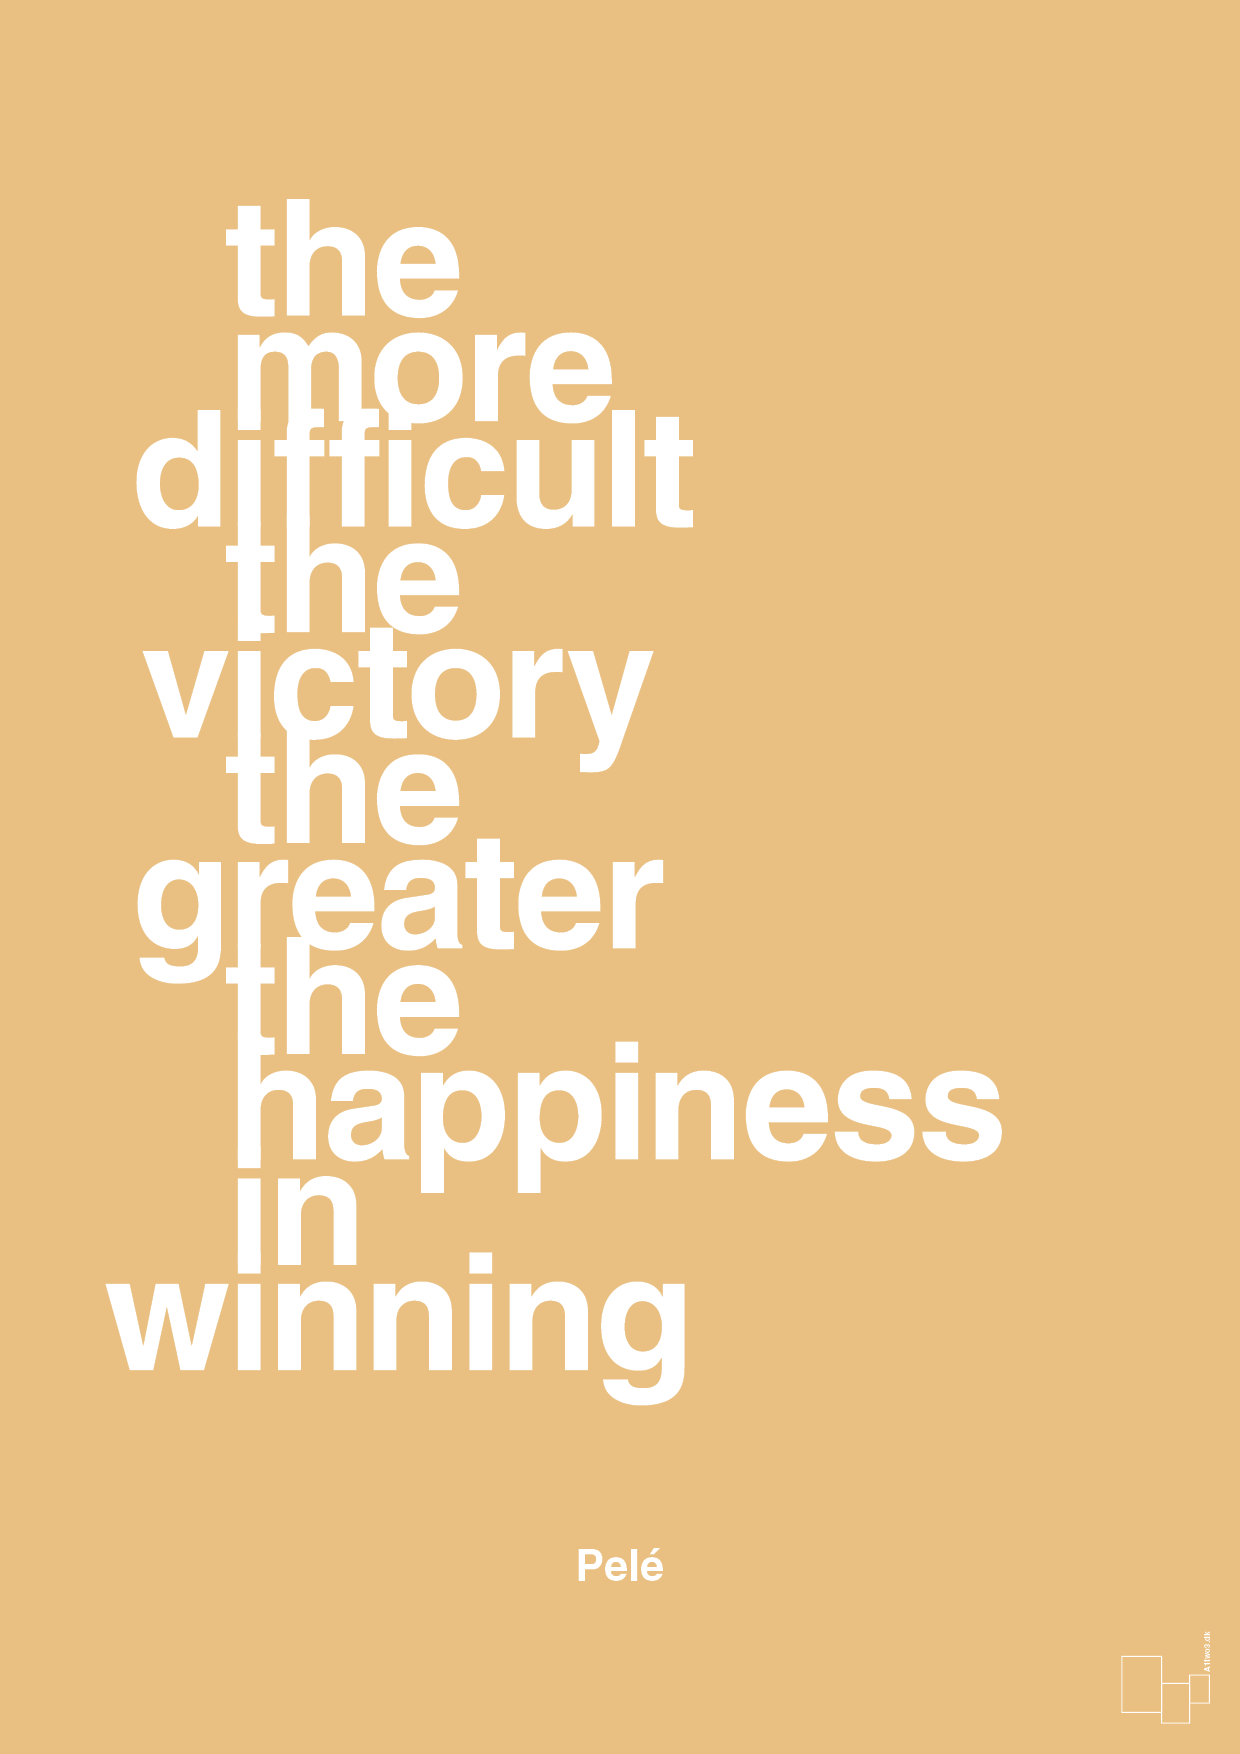 the more difficult the victory the greater the happiness in winning - Plakat med Citater i Charismatic